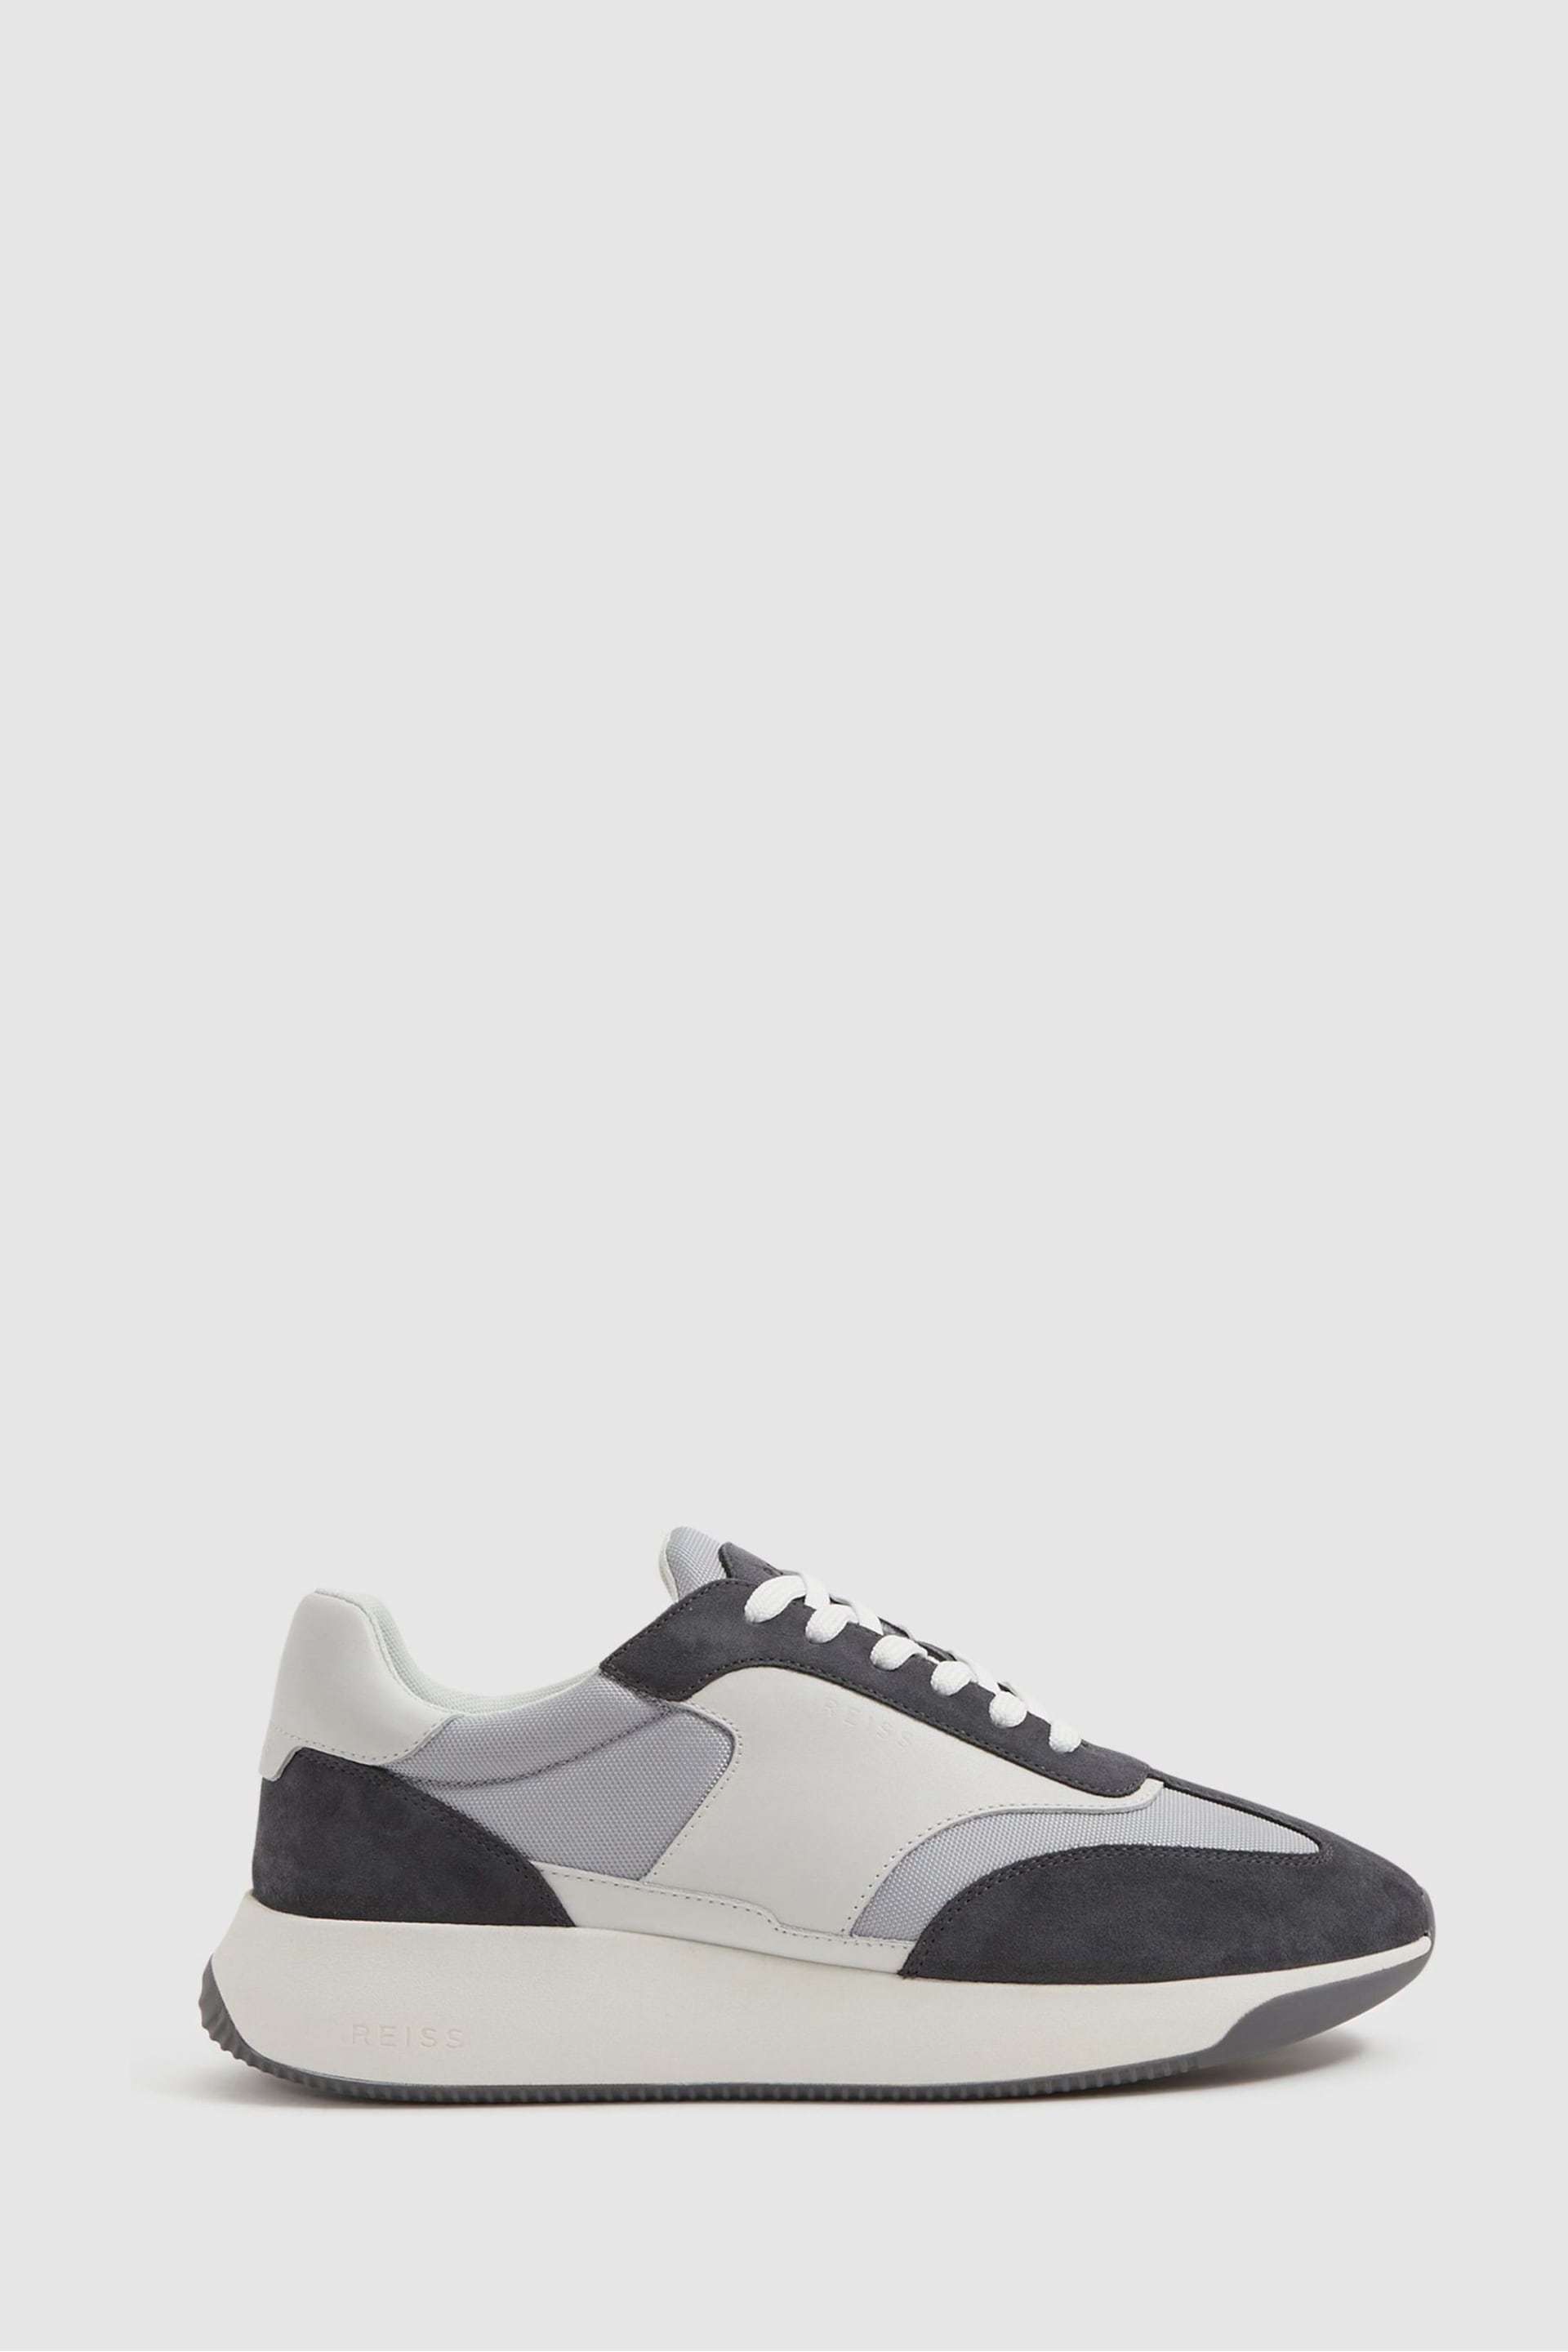 Reiss Grey Mix Emmett Leather Suede Running Trainers - Image 1 of 5